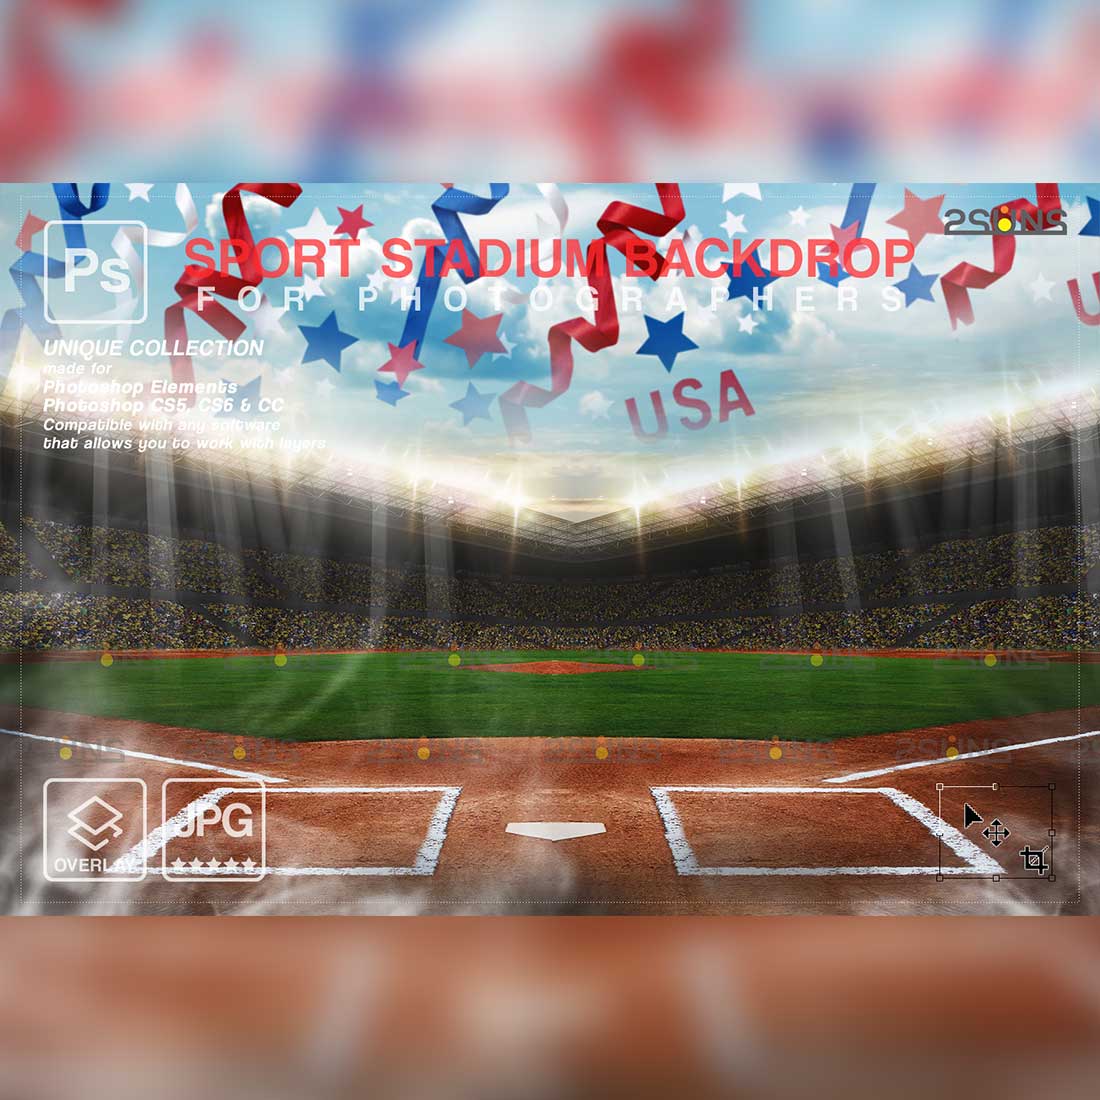 Baseball Modern And Stylish Backdrop Sports Digital Background Overlay Preview Image.